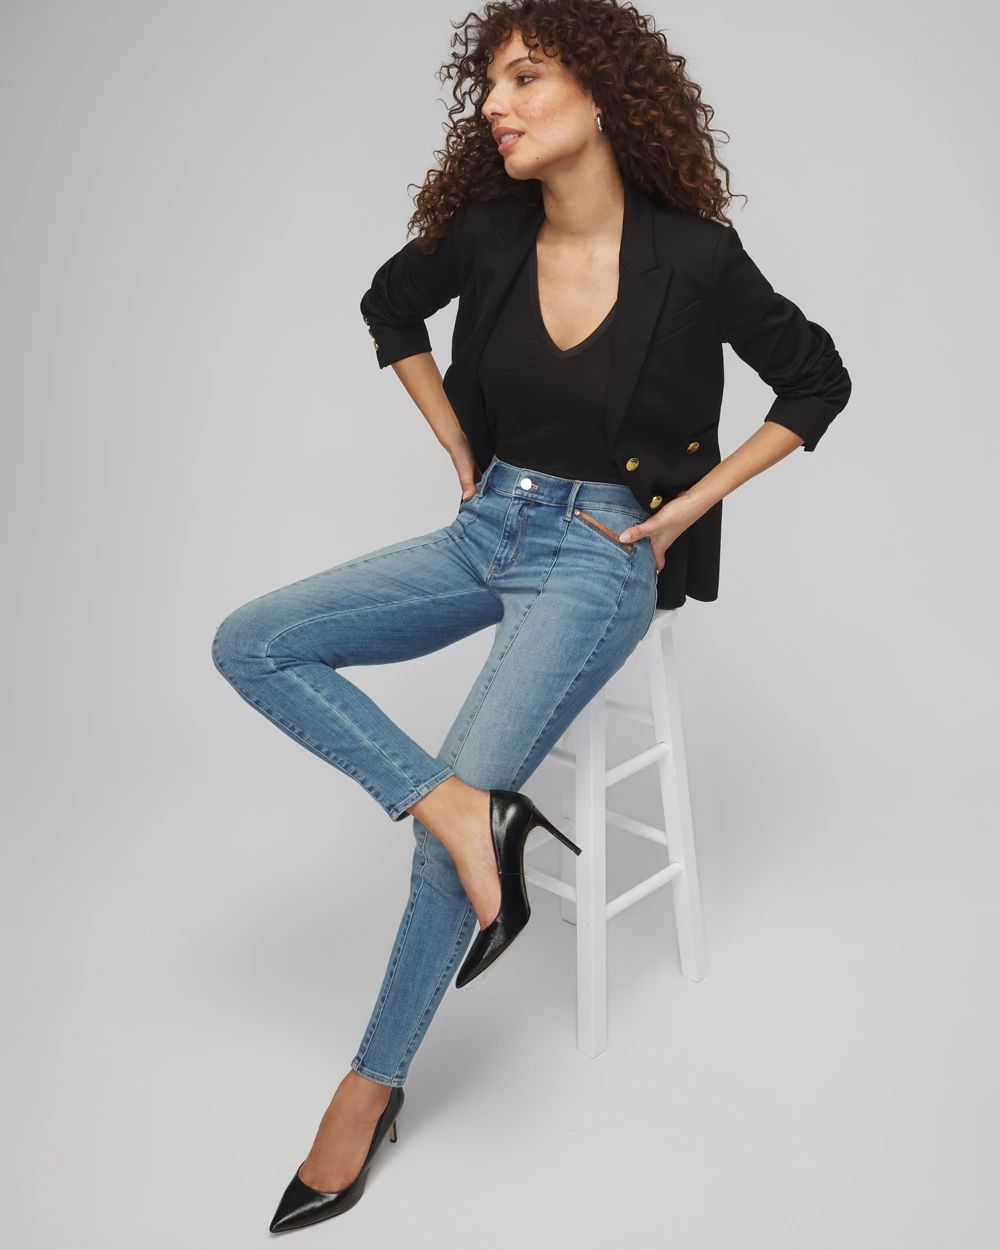 Mid-Rise Everyday Soft Pocket Skinny Ankle Jeans click to view larger image.